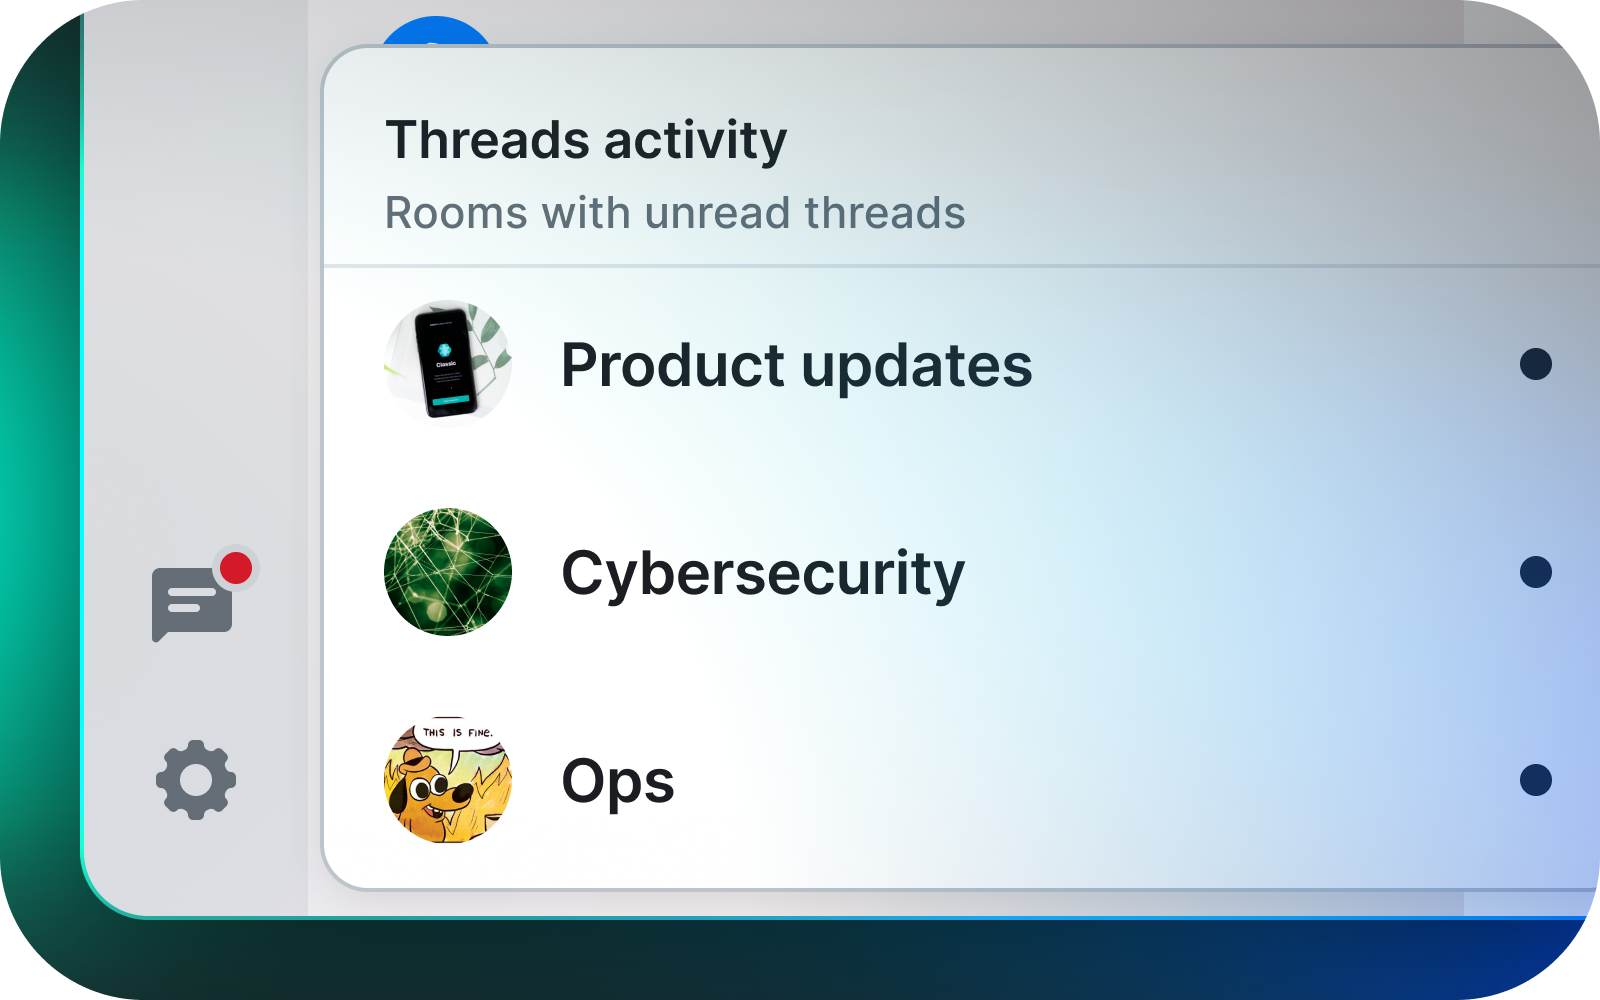 A graphic depicting the threads notification icon showing a users current threads activity